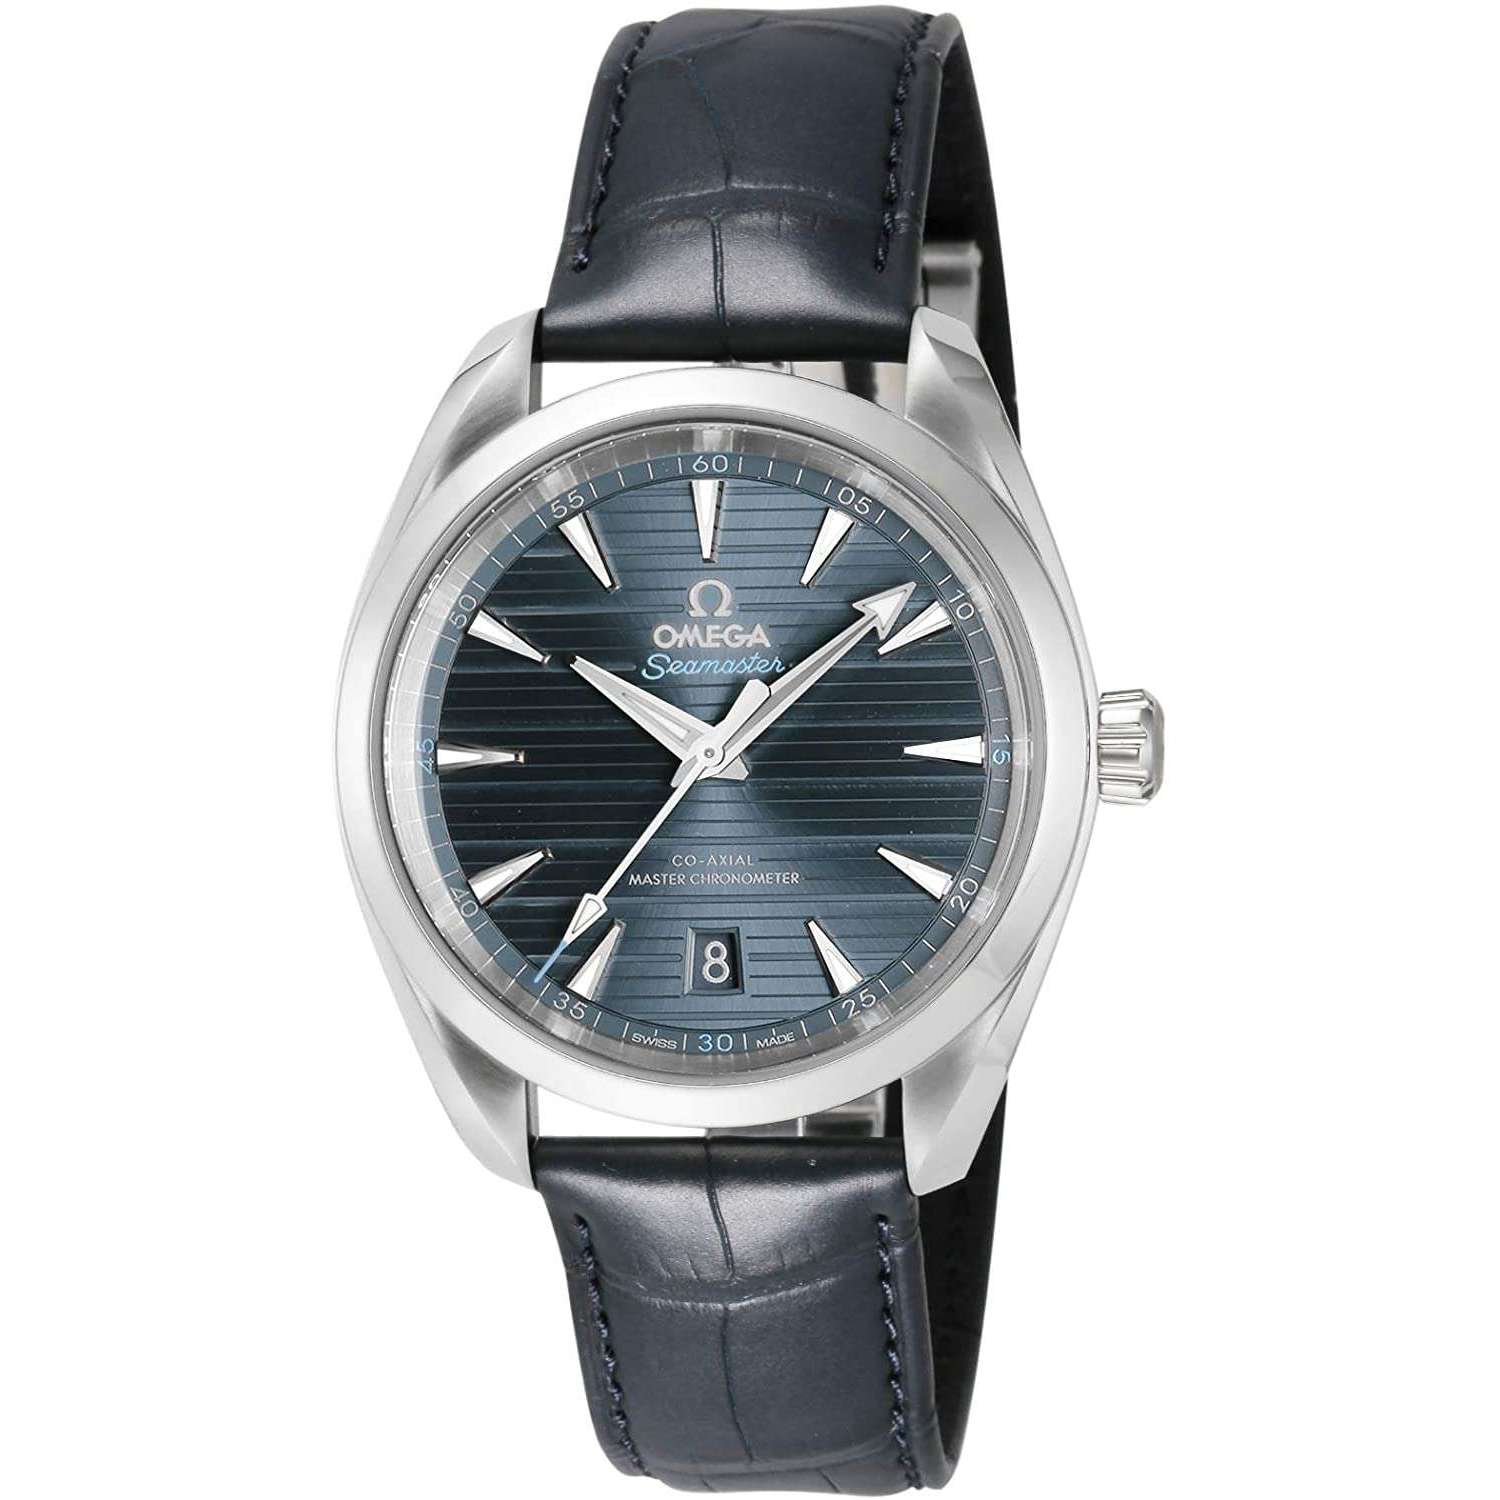 ROOK JAPAN:OMEGA SEAMASTER CO-AXIAL MASTER CHRONOMETER 41 MM MEN WATCH 220.13.41.21.03.001,Luxury Watch,Omega